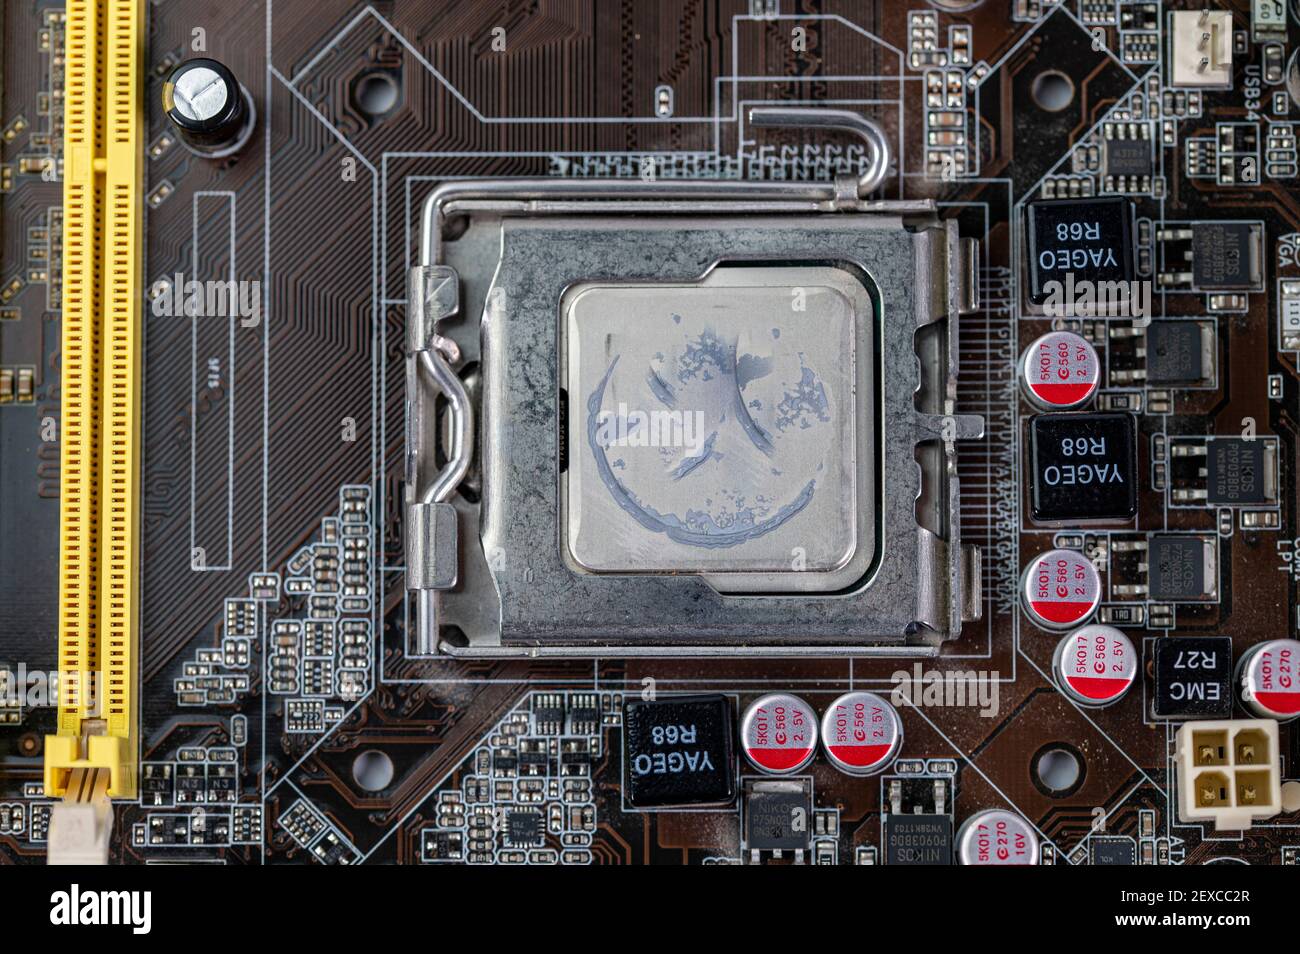 detail of a motherboard and processor Stock Photo